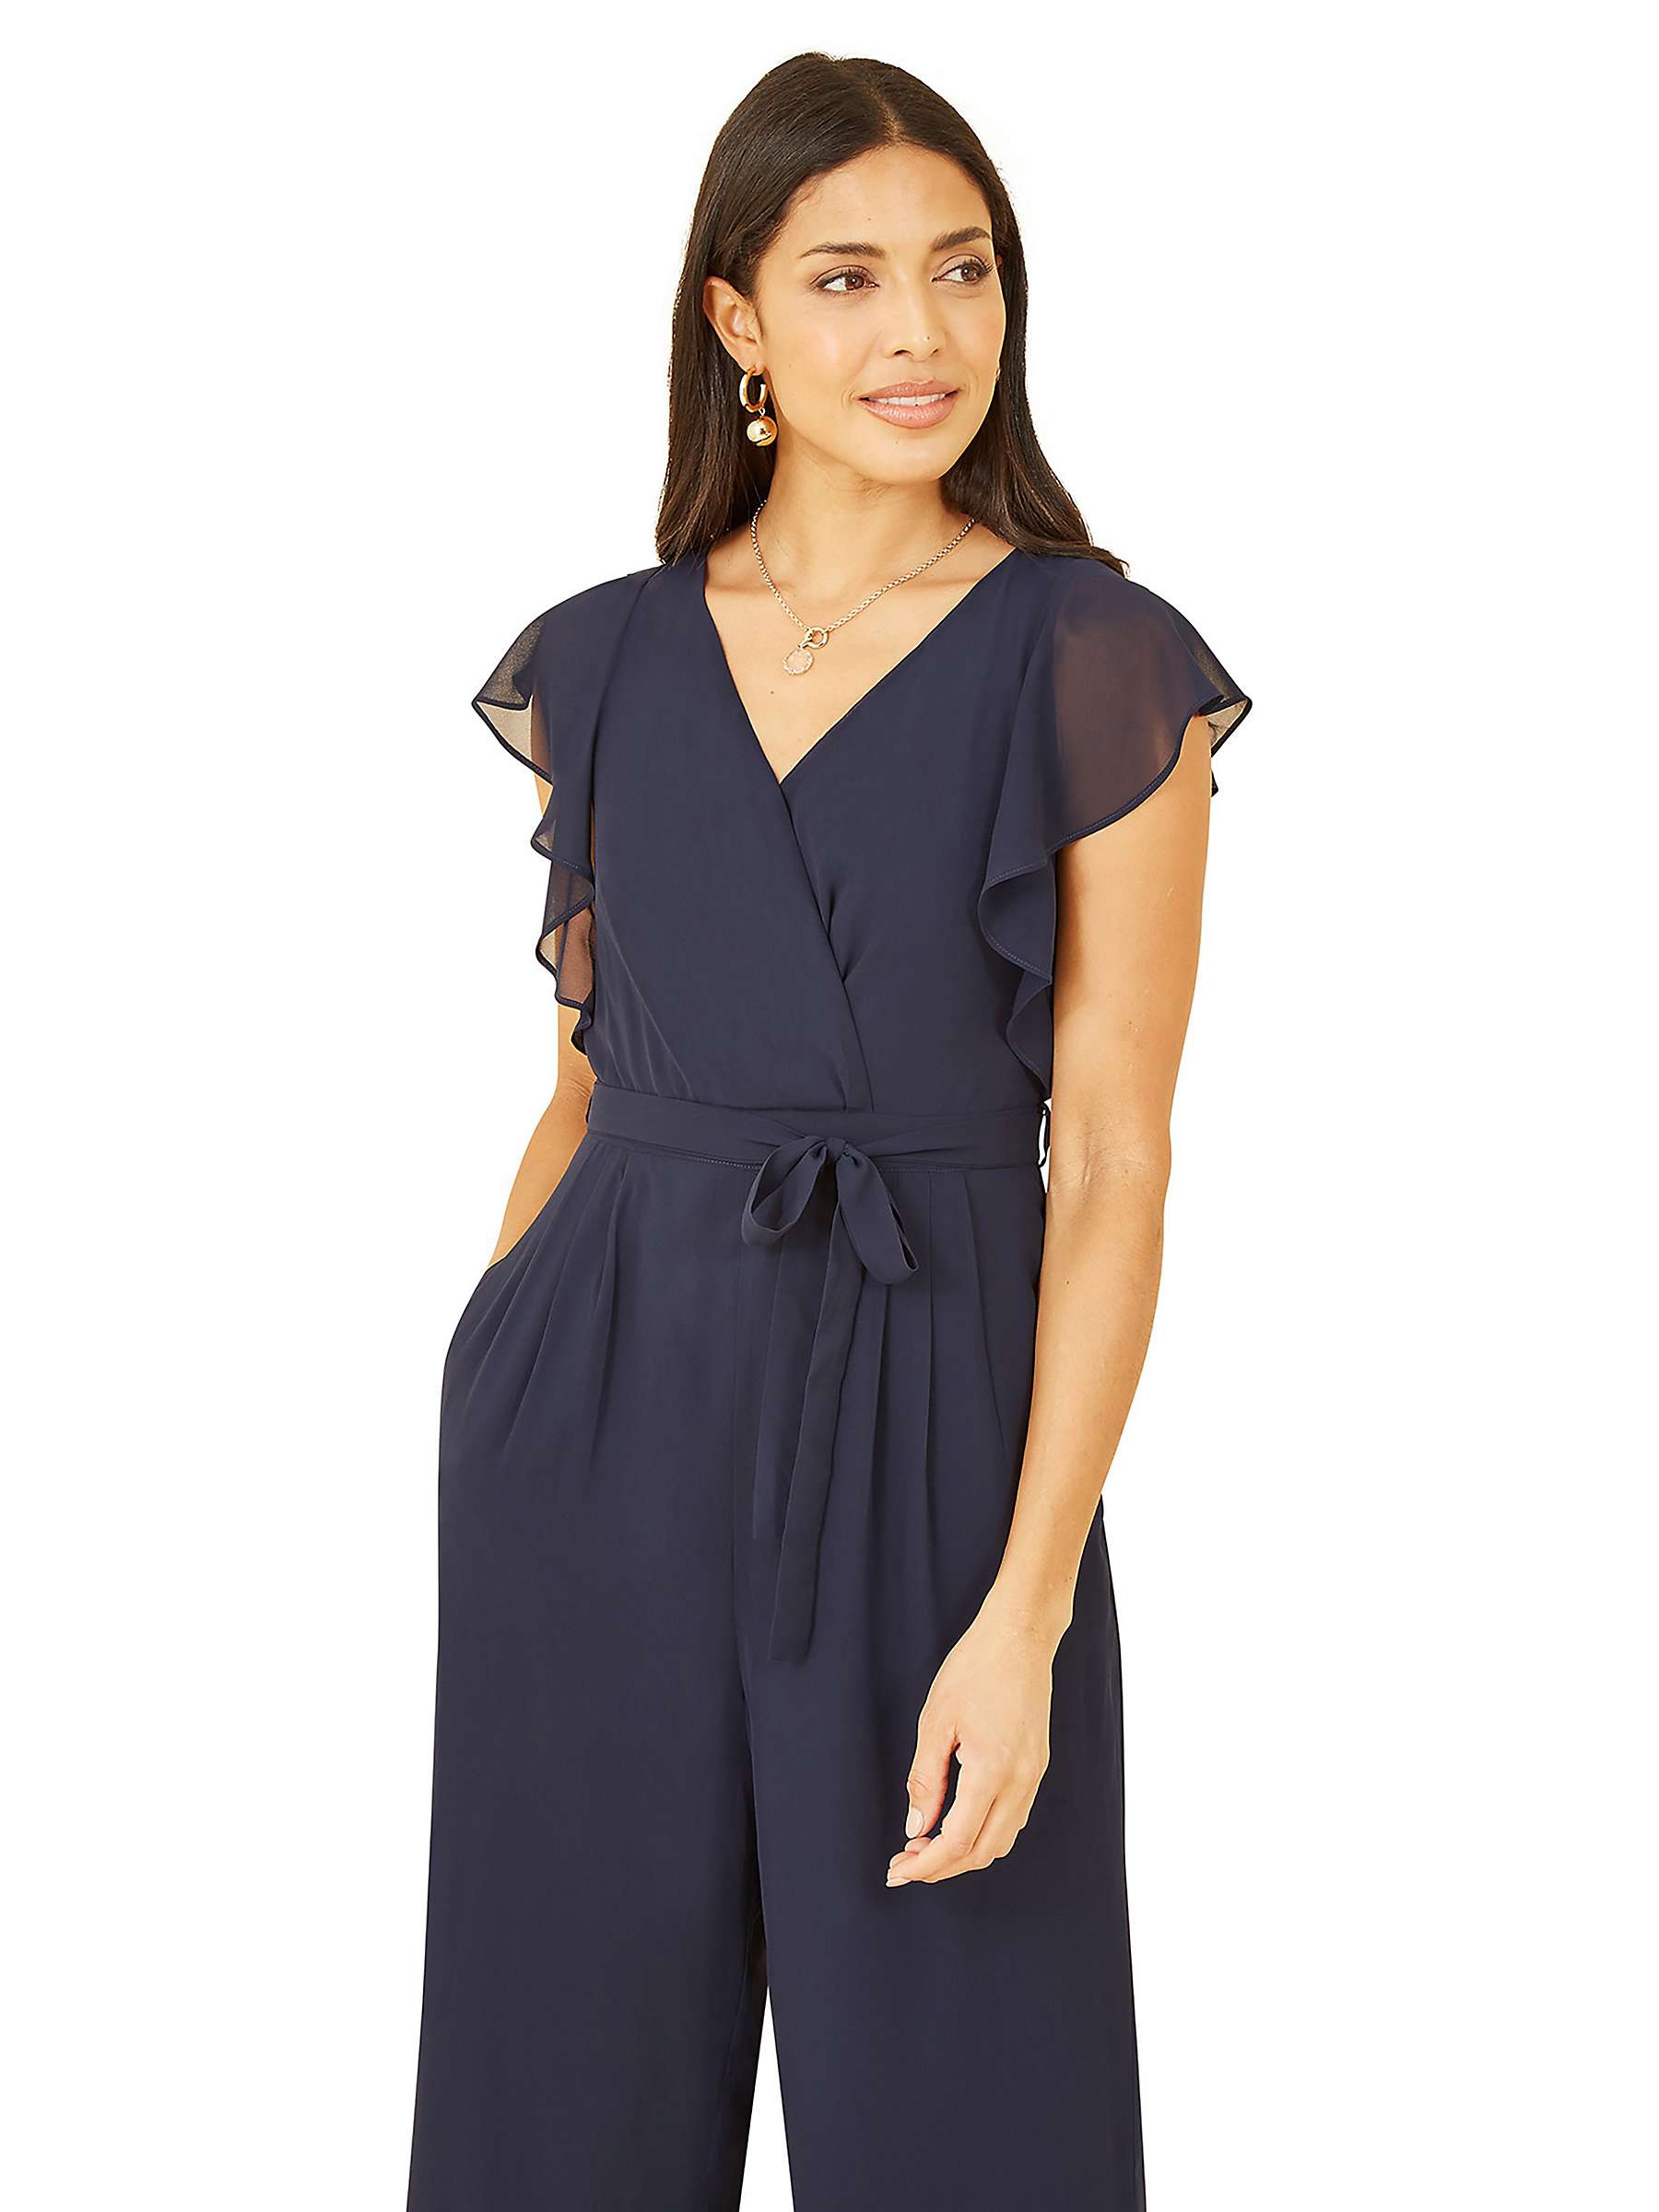 Buy Yumi Frill Wrap Jumpsuit, Navy Online at johnlewis.com